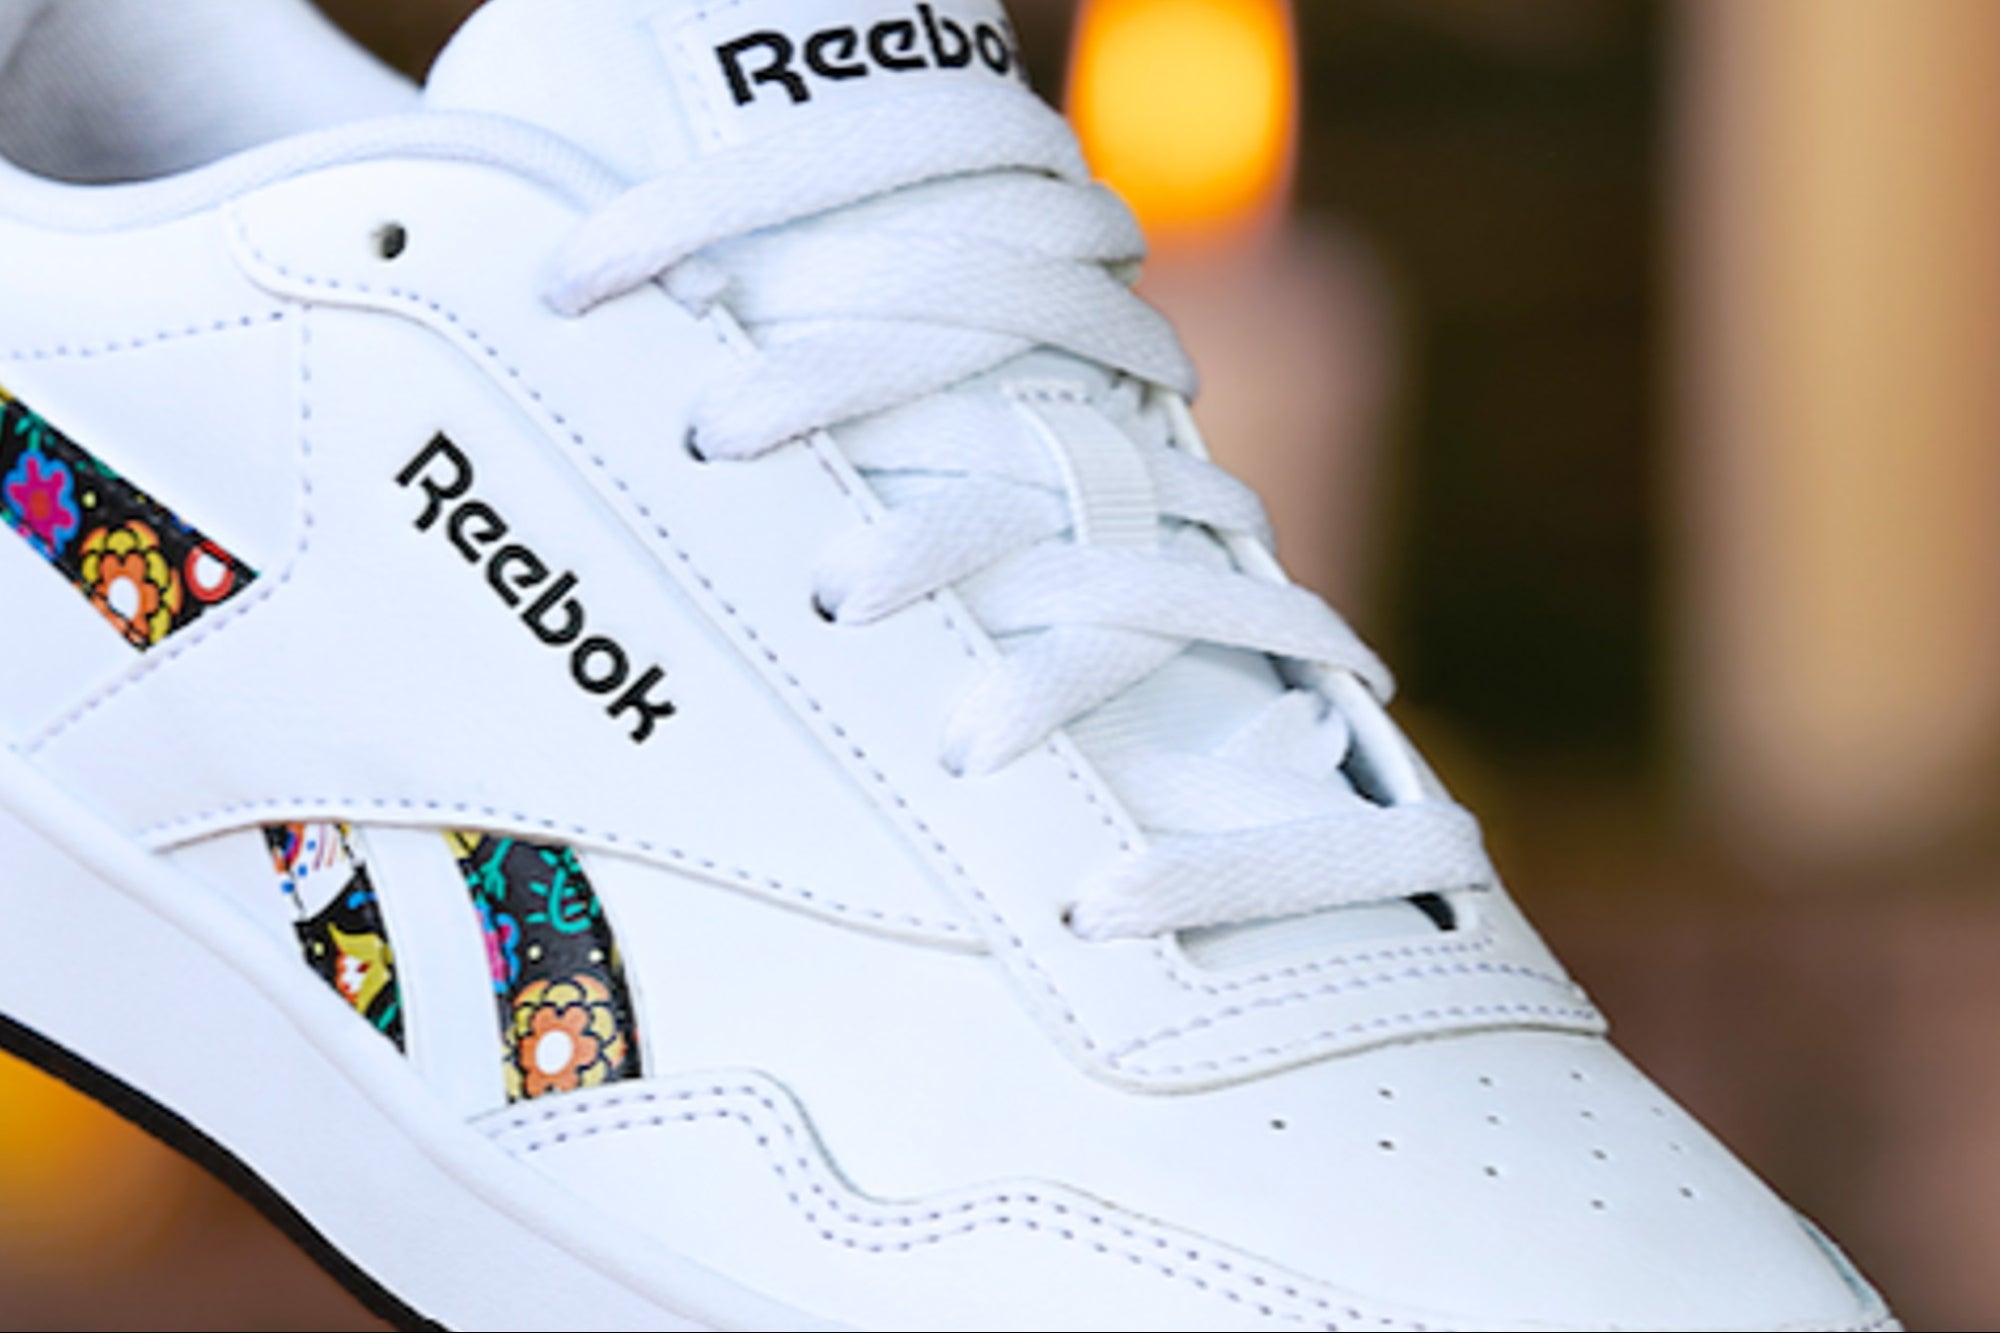 Sophie Discrepancia Albany Reebok presents its first sneakers inspired by the Day of the Dead